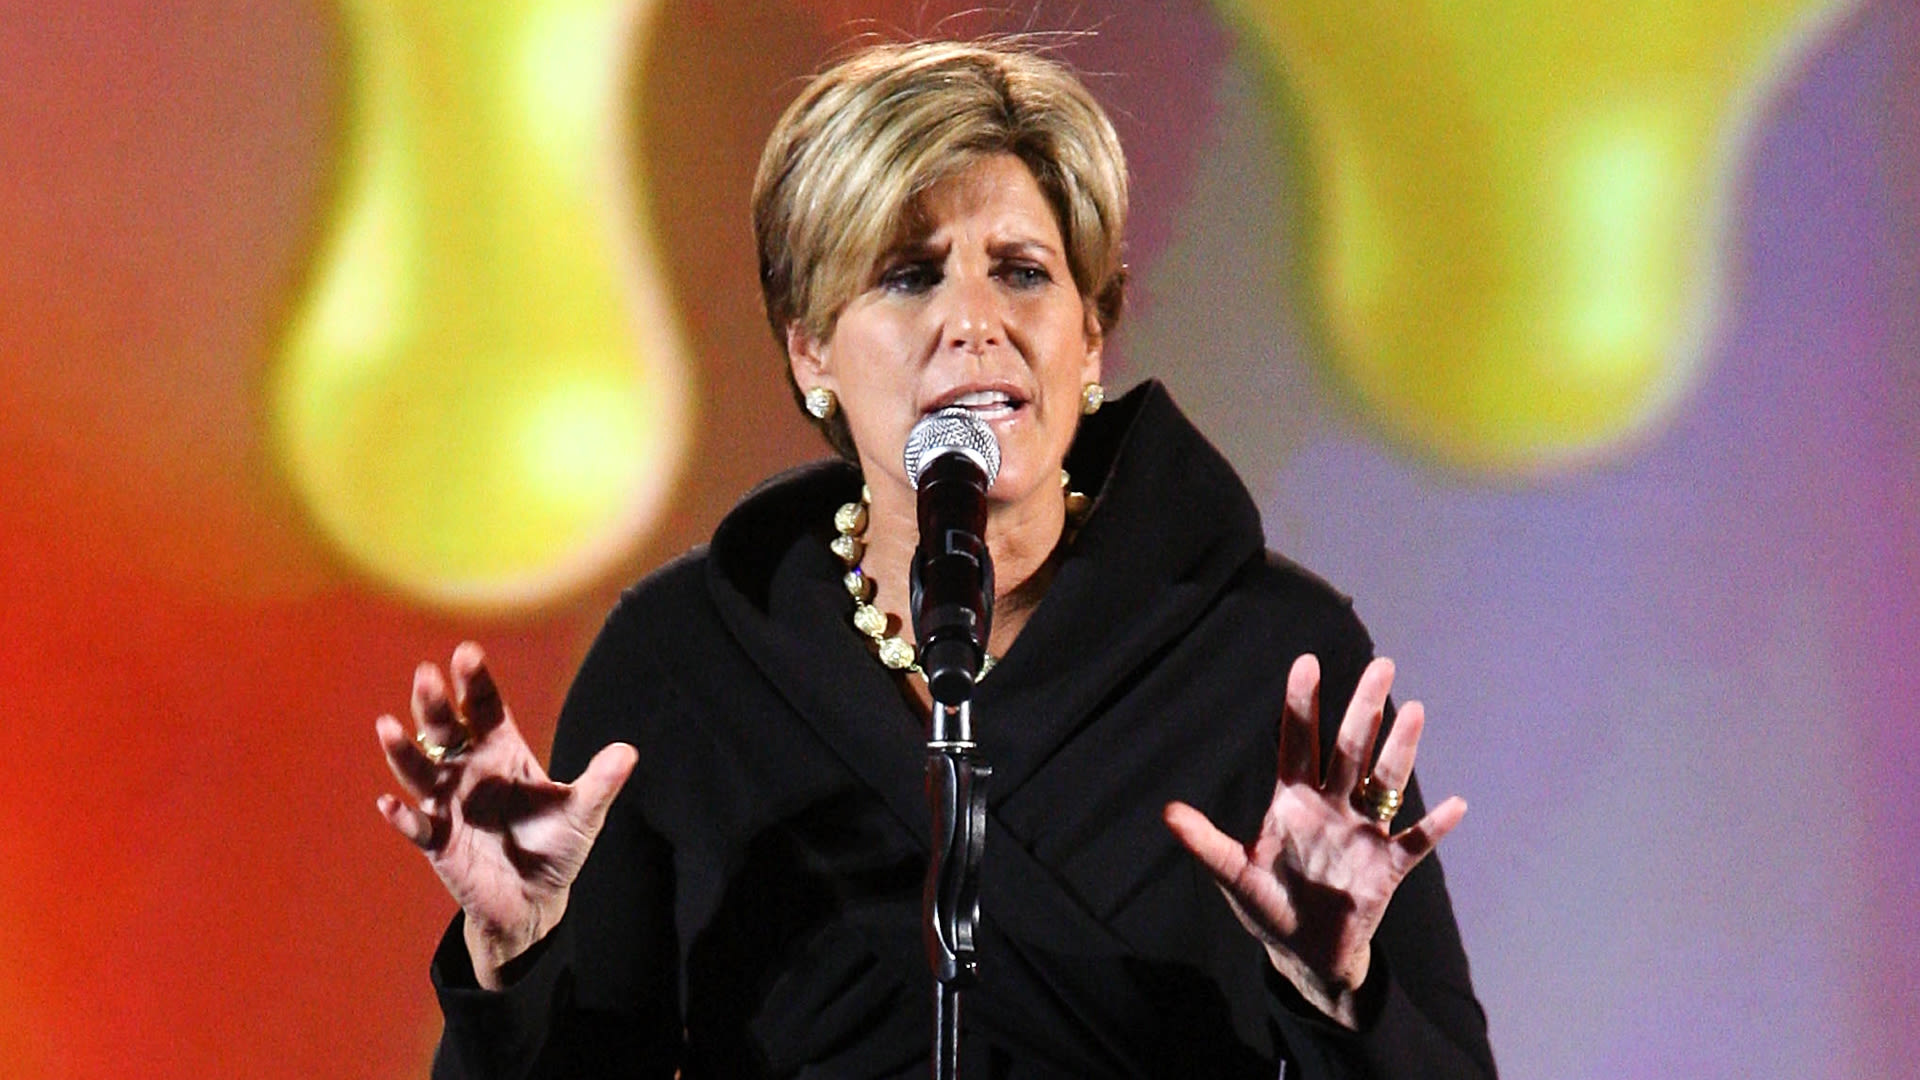 Suze Orman: This Is the Smartest Move You Could Make With Your Money This Year